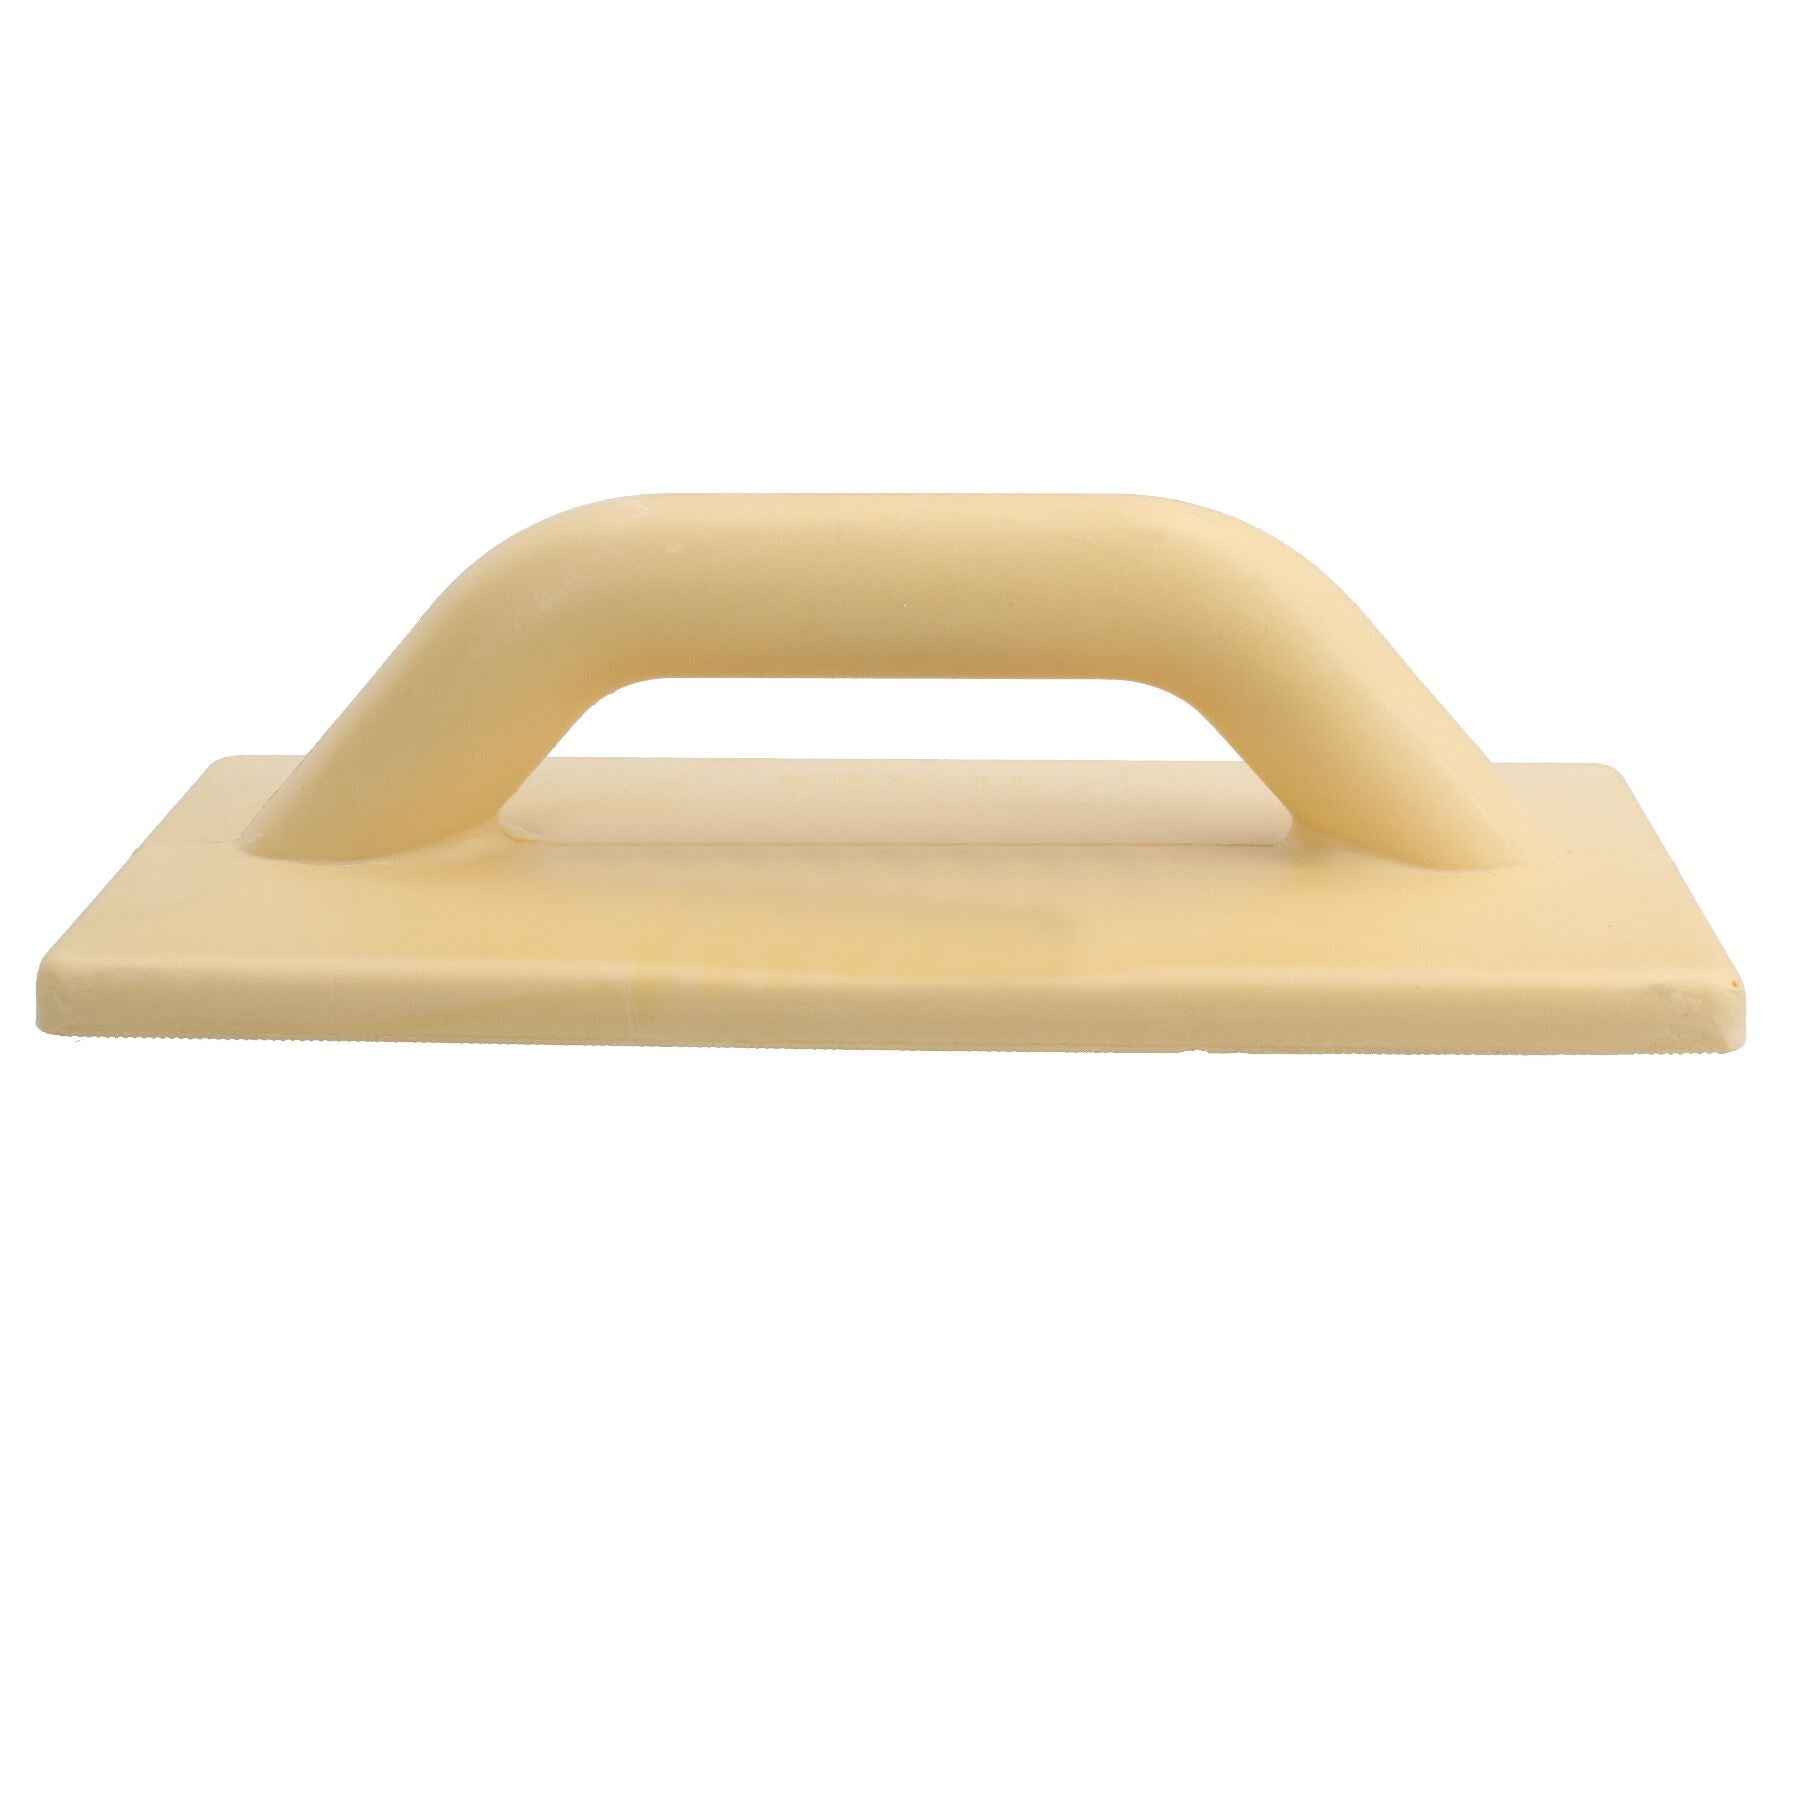 Plasterers Poly Plastering Float 280mm x 110mm Smooth Plaster Or Cement TE581